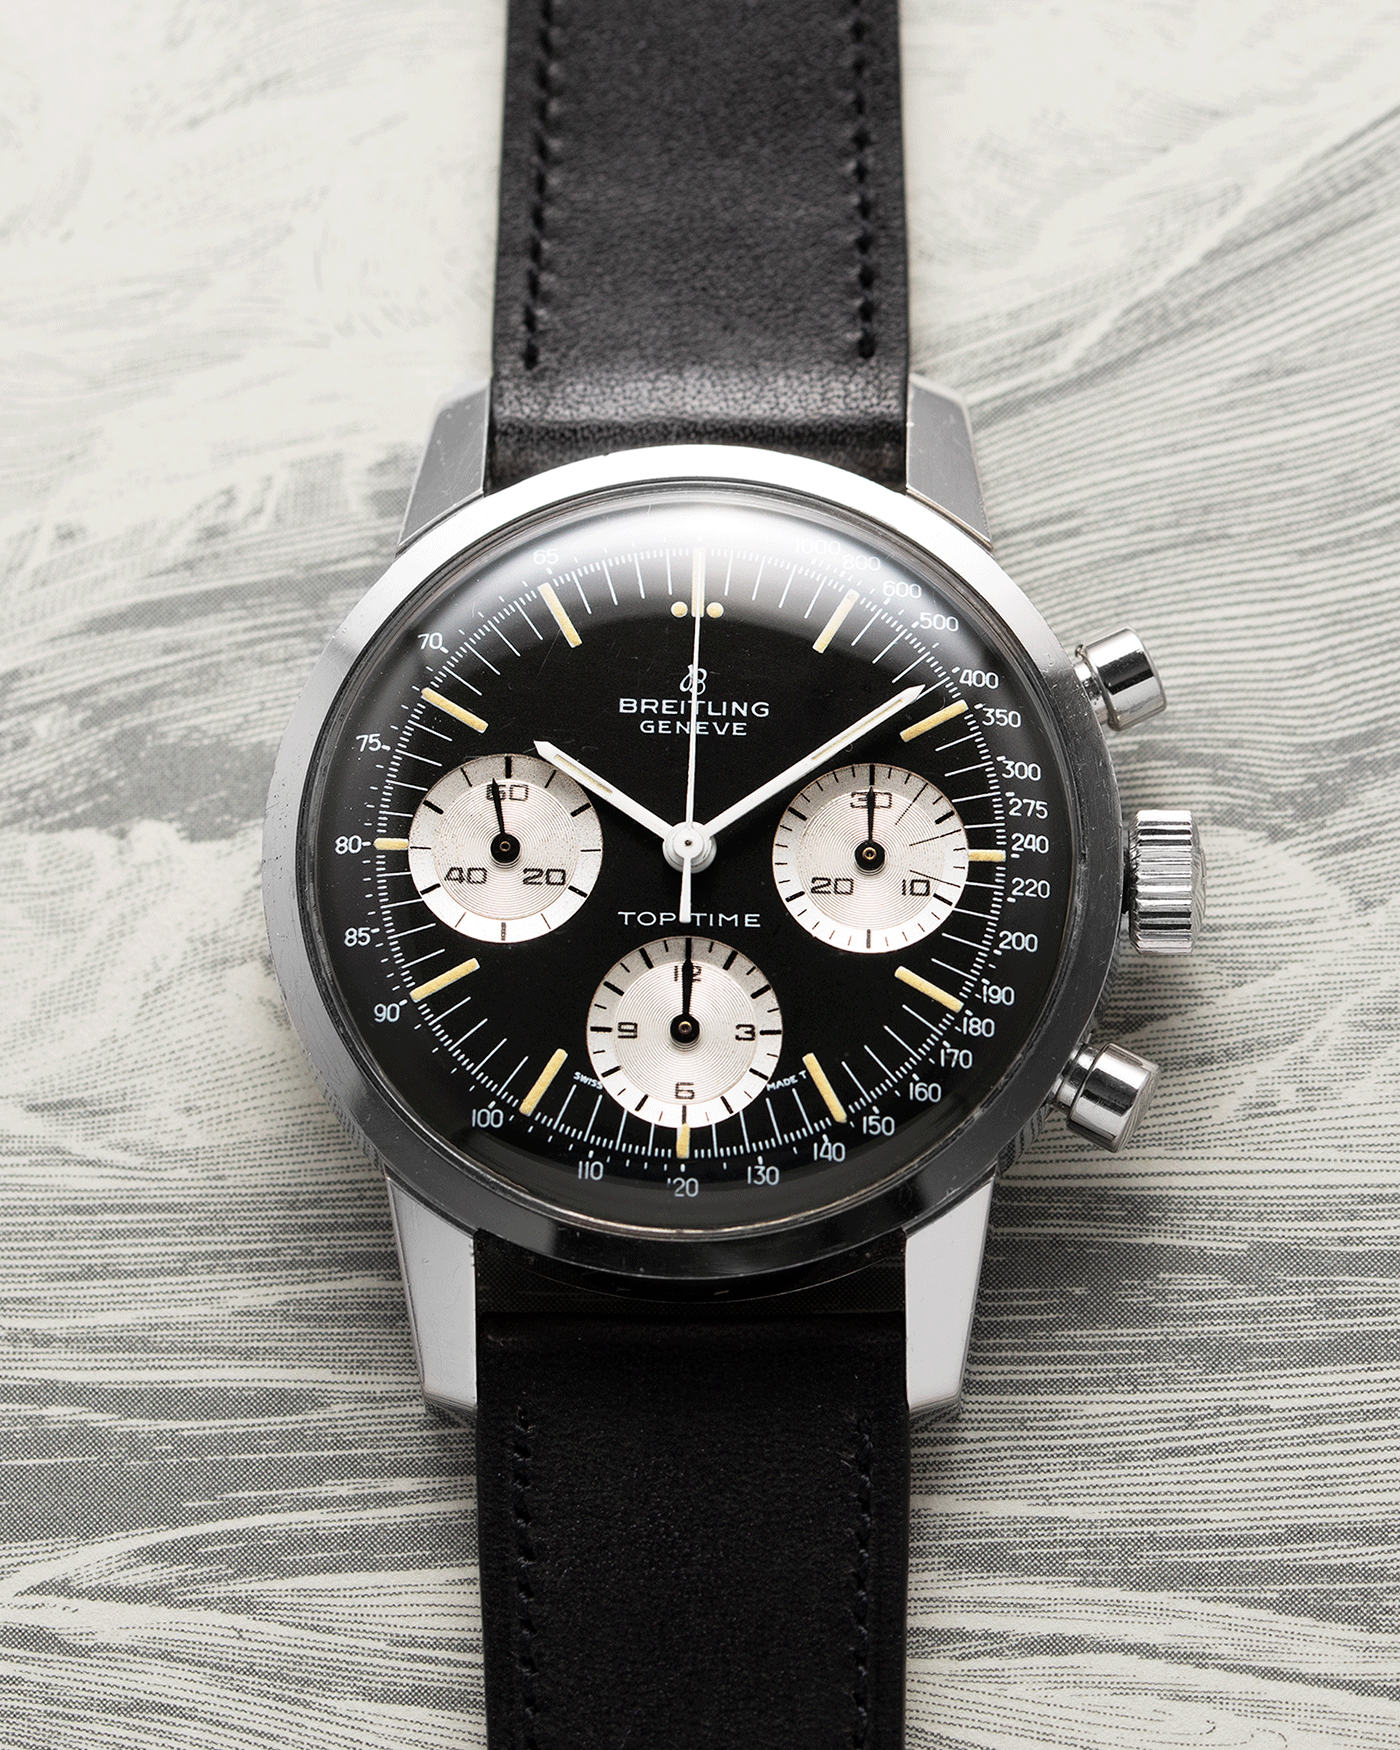 Brand: Breitling Year: 1960’s Model: Top Time Reference Number: 810 Material: Stainless Steel Movement: Manually wound Venus 178 Case Diameter: 38mm Lug Width: 18mm Bracelet/Strap: Nostime Black Calf